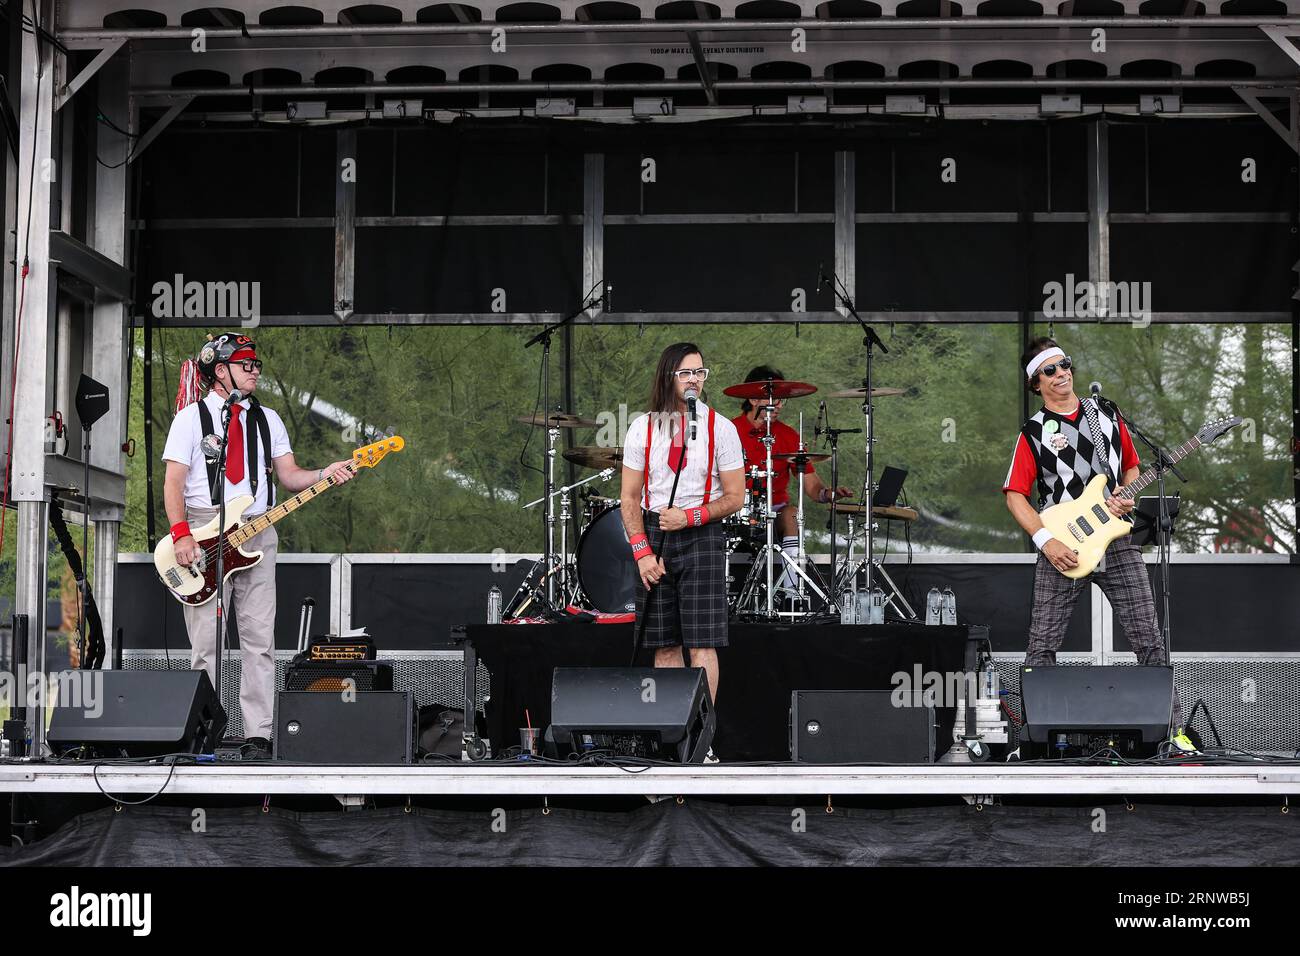 Las Vegas, NV, USA. 02nd Sep, 2023. The Spazmatics perform on stage inside the Rebel Village Fan Zone prior to the start of the college football game featuring the Bryant Bulldogs and the UNLV Rebels at Allegiant Stadium in Las Vegas, NV. Christopher Trim/CSM/Alamy Live News Stock Photo